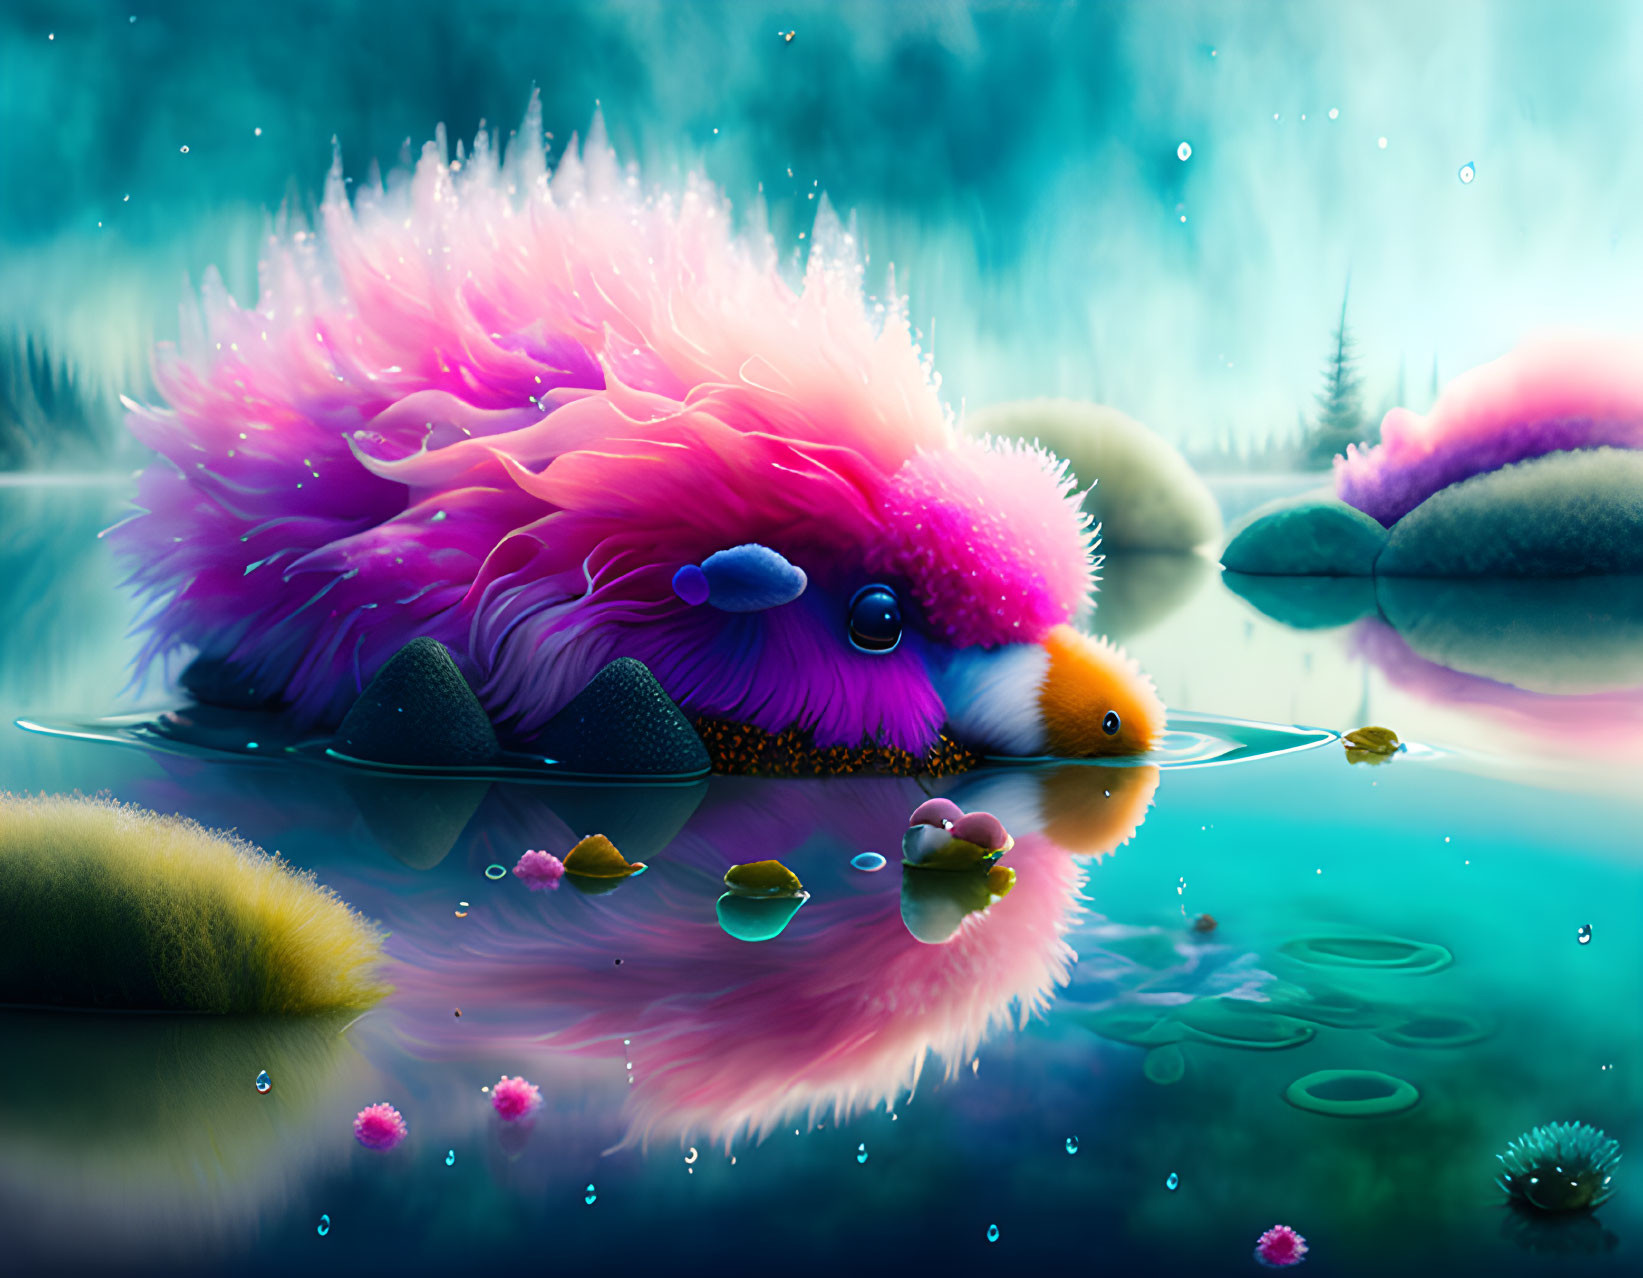 Colorful Fluffy Creature Resting by Serene Lake